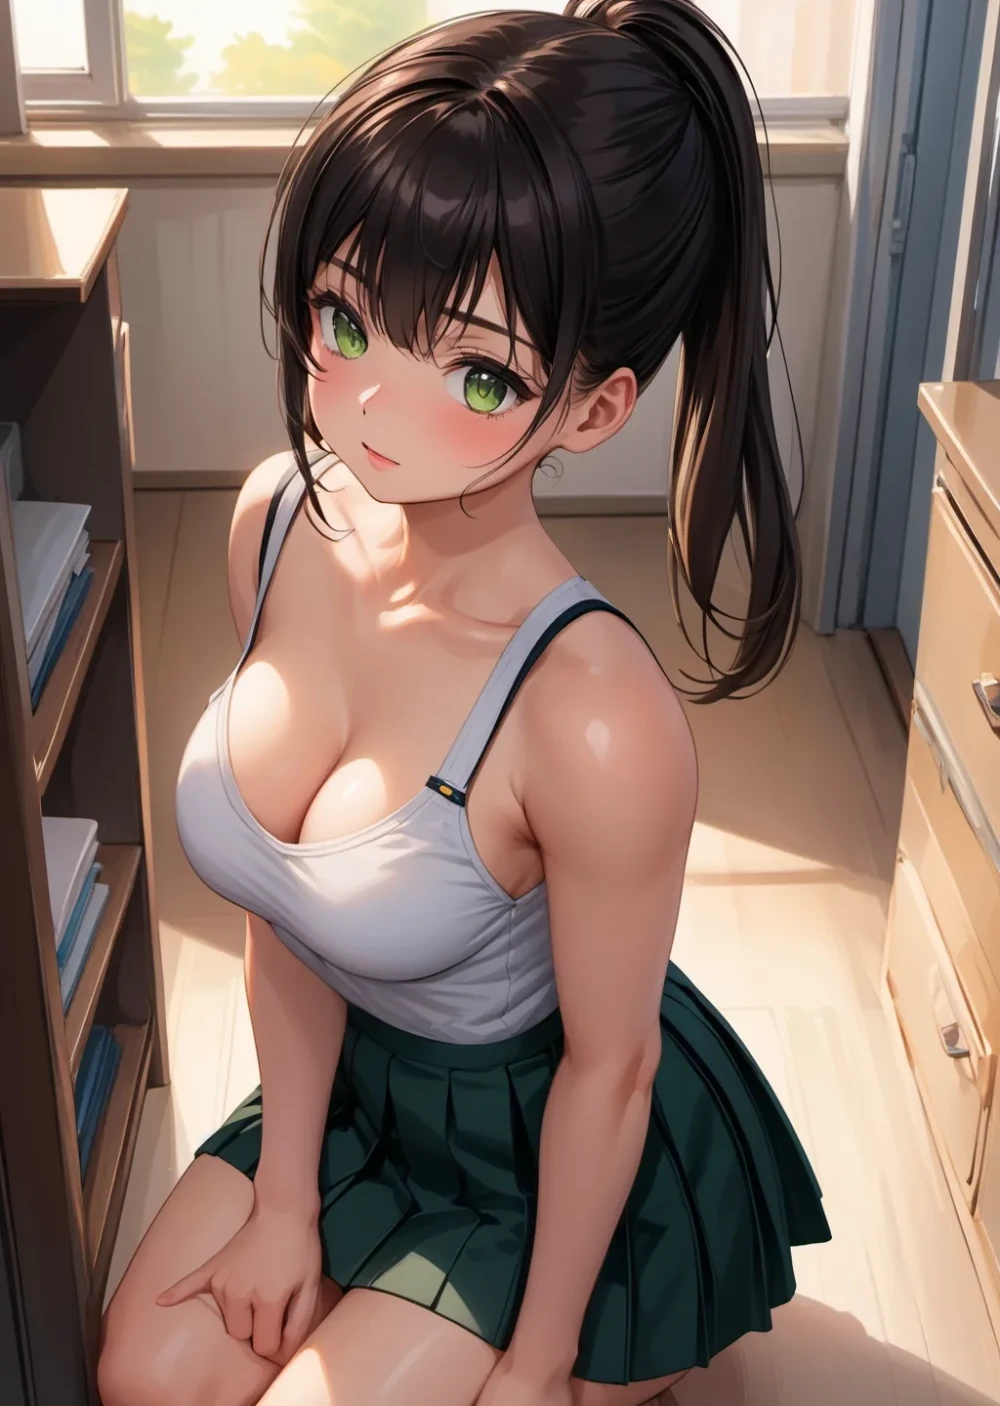 ponytail-anime-style-all-ages-2-32